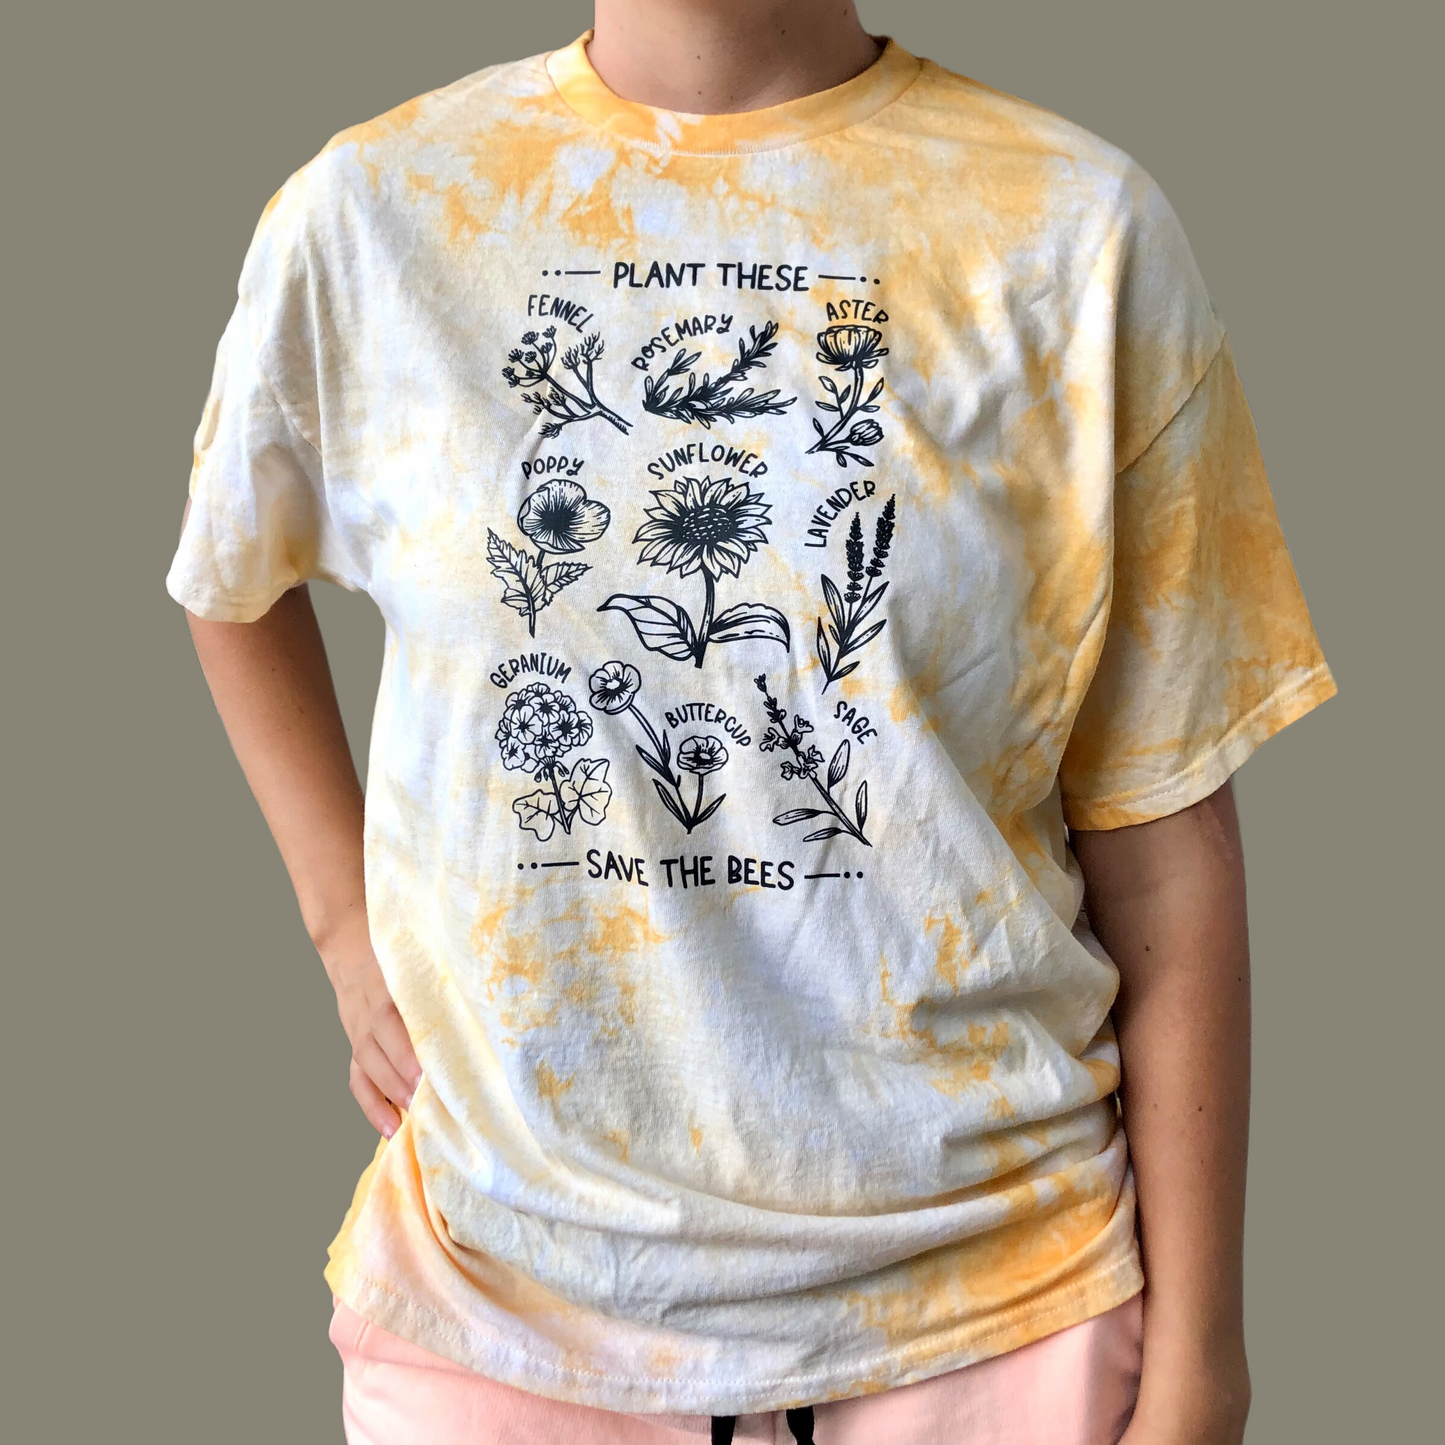 Plant These Save the Bees Golden Tie Dye Tee